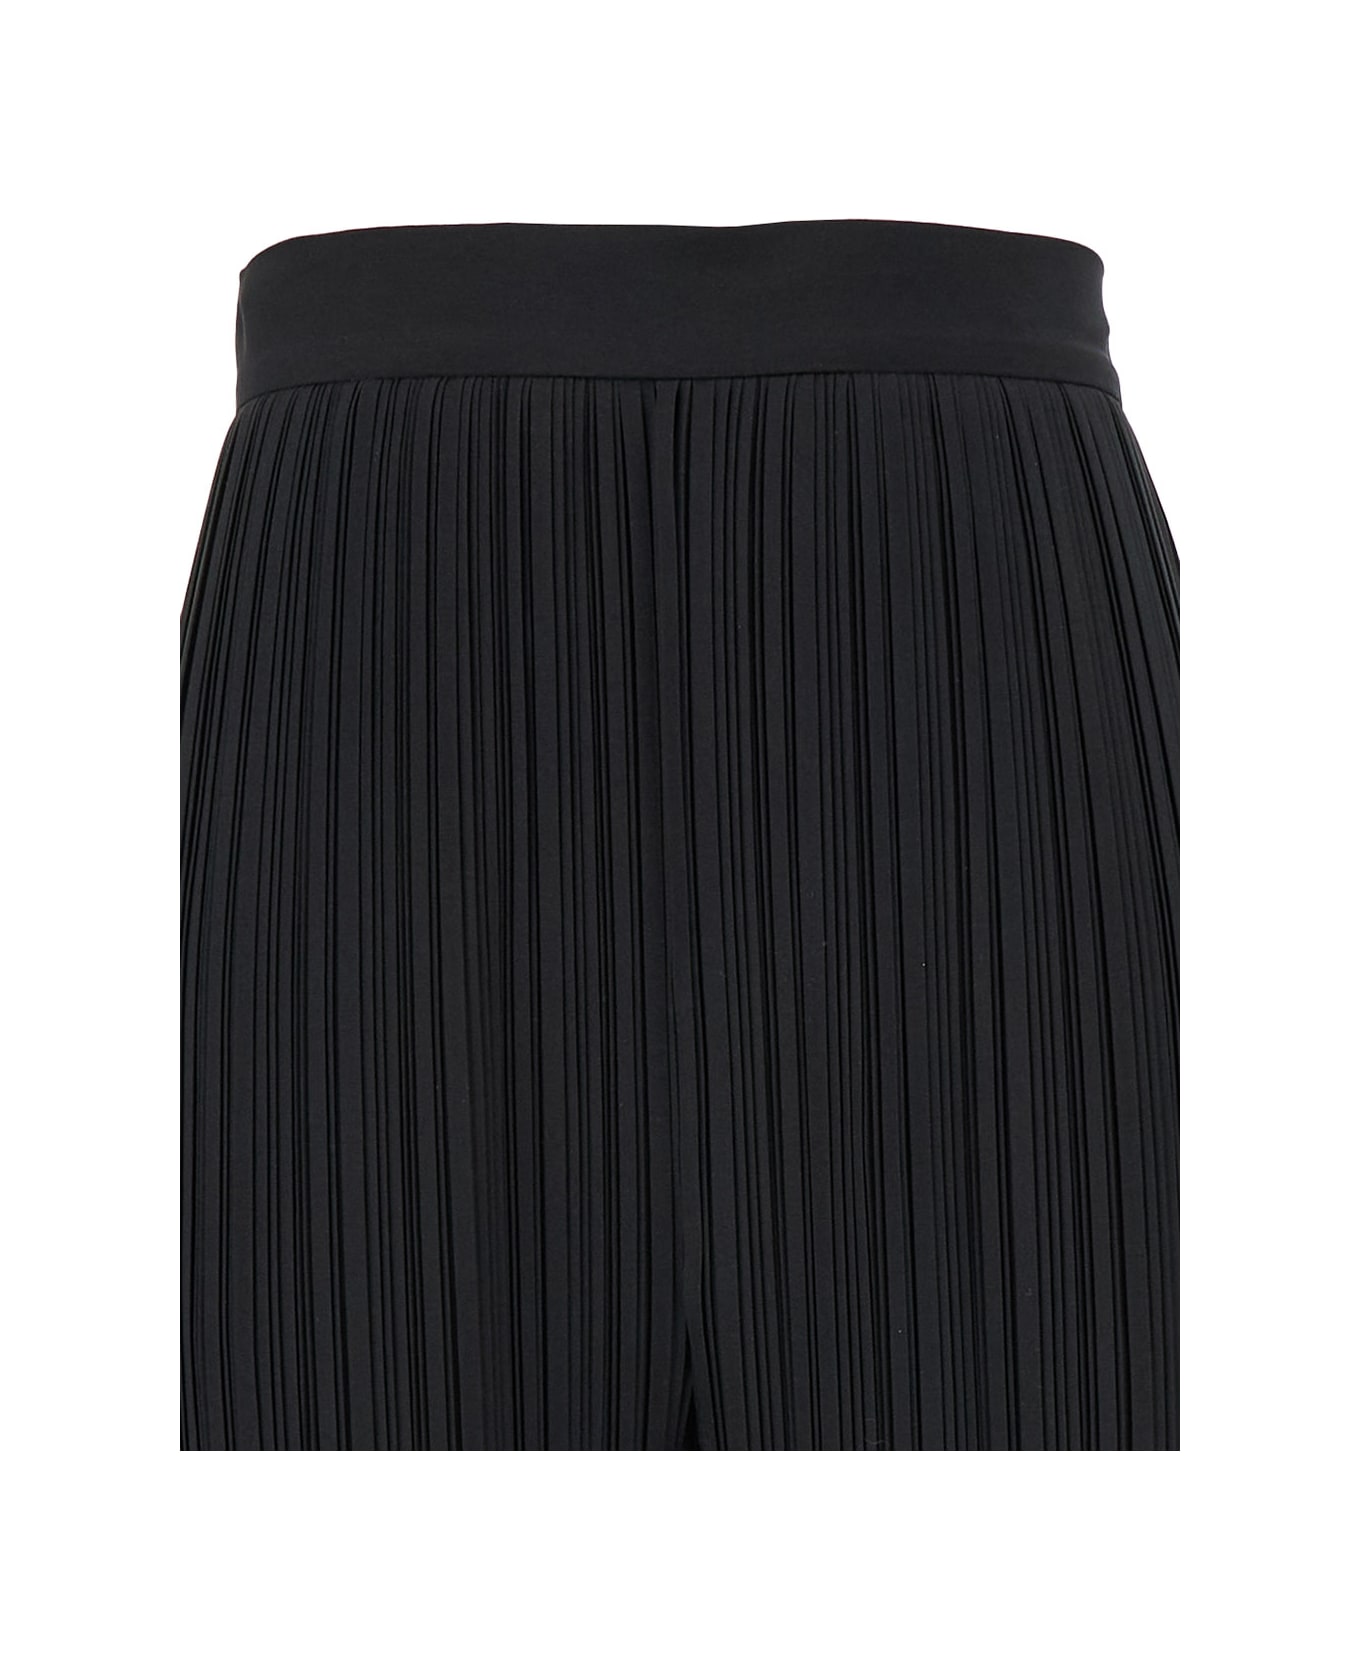 Lanvin Black Pleated Pants With Invisible Zip In Crêpe De Chine Woman - Black ボトムス